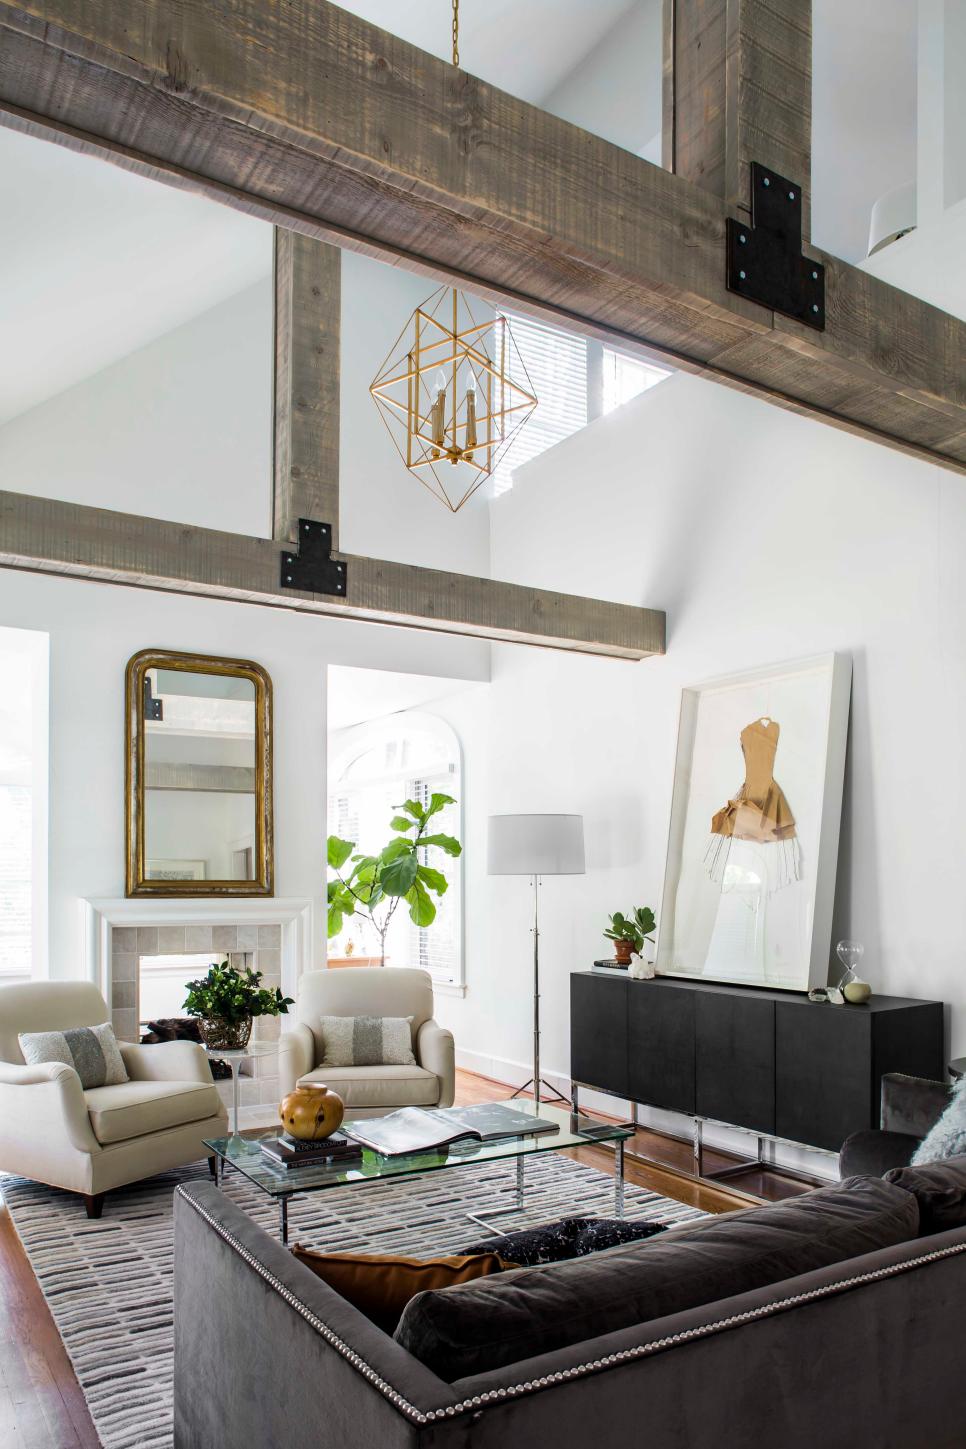 White Living Room With Exposed Beams and Gray Furnishings | HGTV